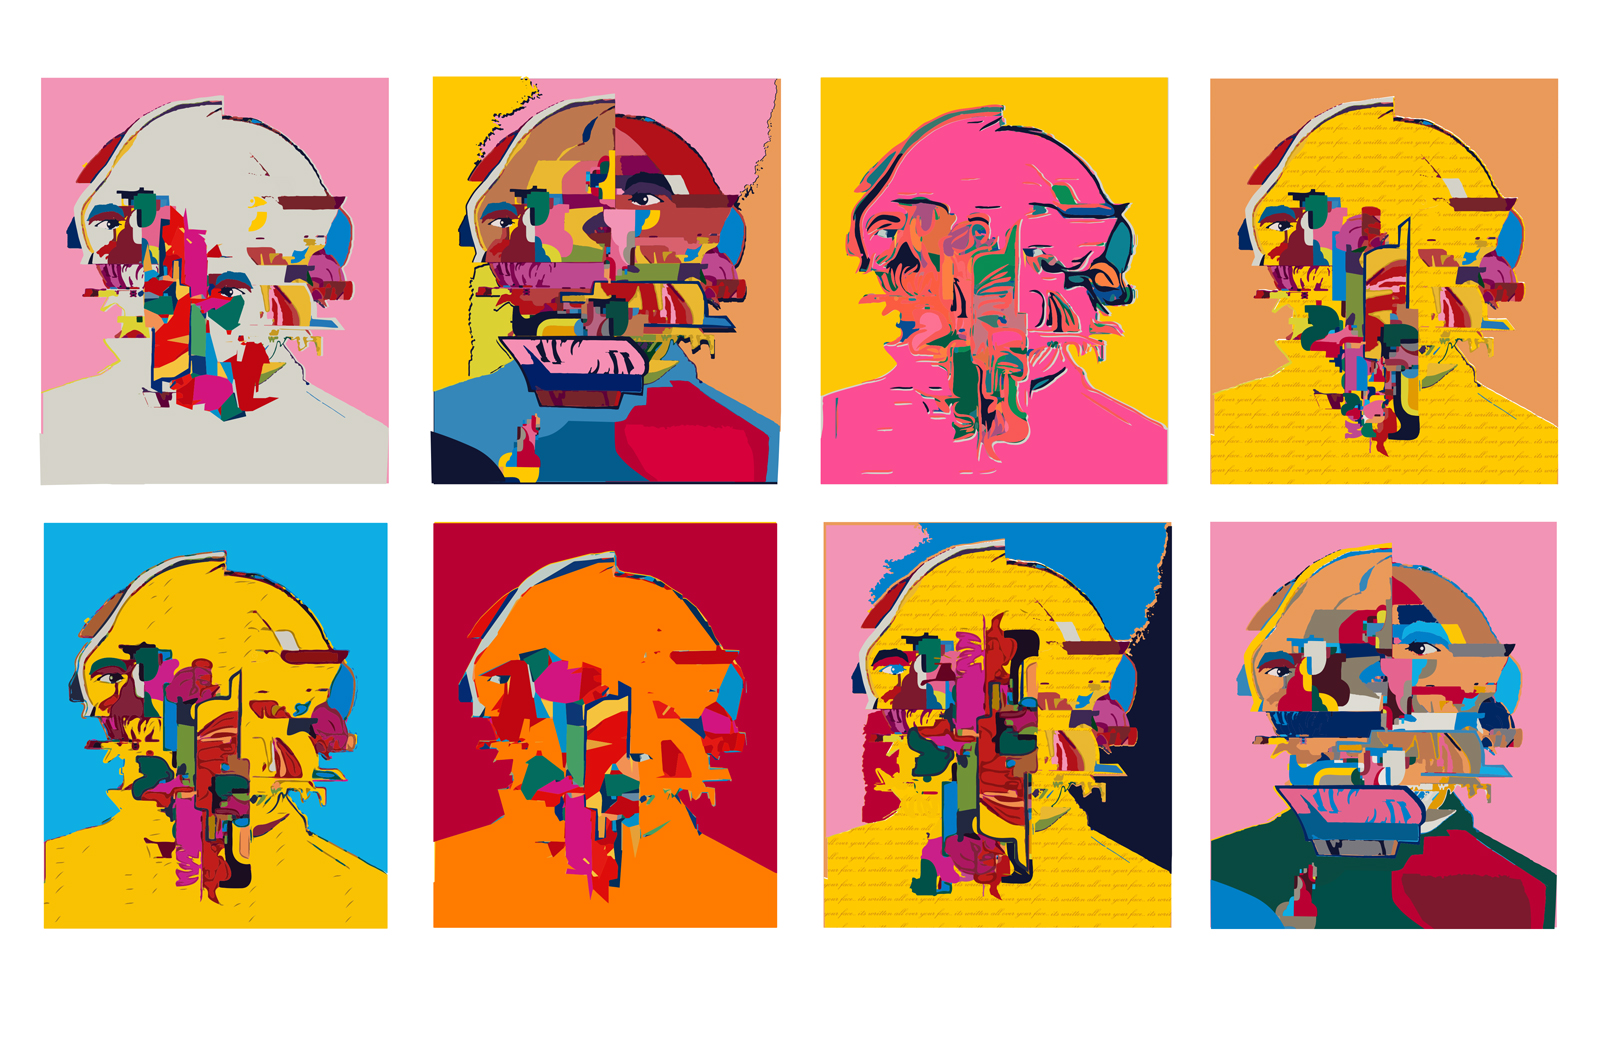 Two rows of 4 faces each on a different brightly colored background. The features of each of face are obscured by jags and multiple shapes of contrasting bright colors.